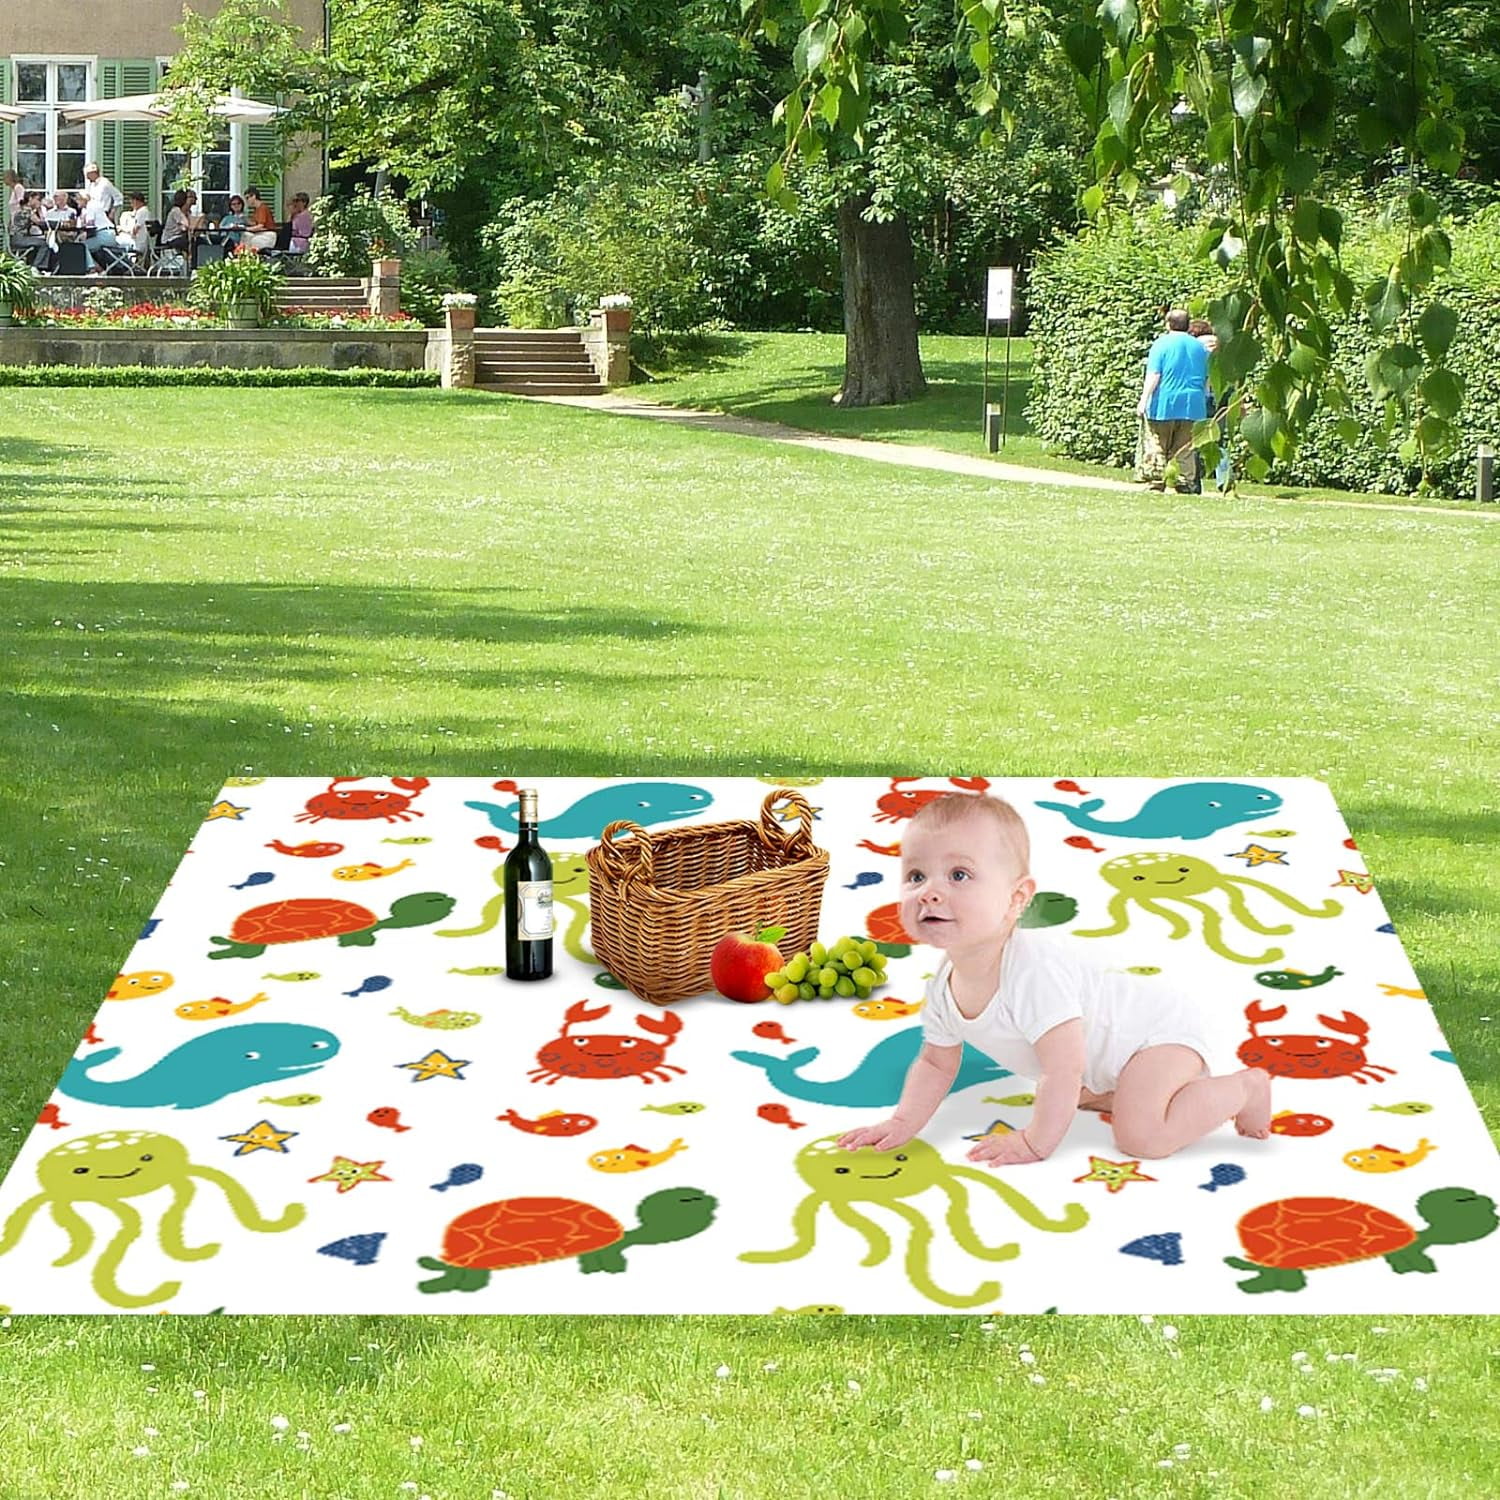 Large Splat Mat 54x72 Inches Extra Large Waterproof Mat Anti-Slip Bottom,  Baby Art Playtime Mat for Craft/Mealtime on Table or Floor, Washable